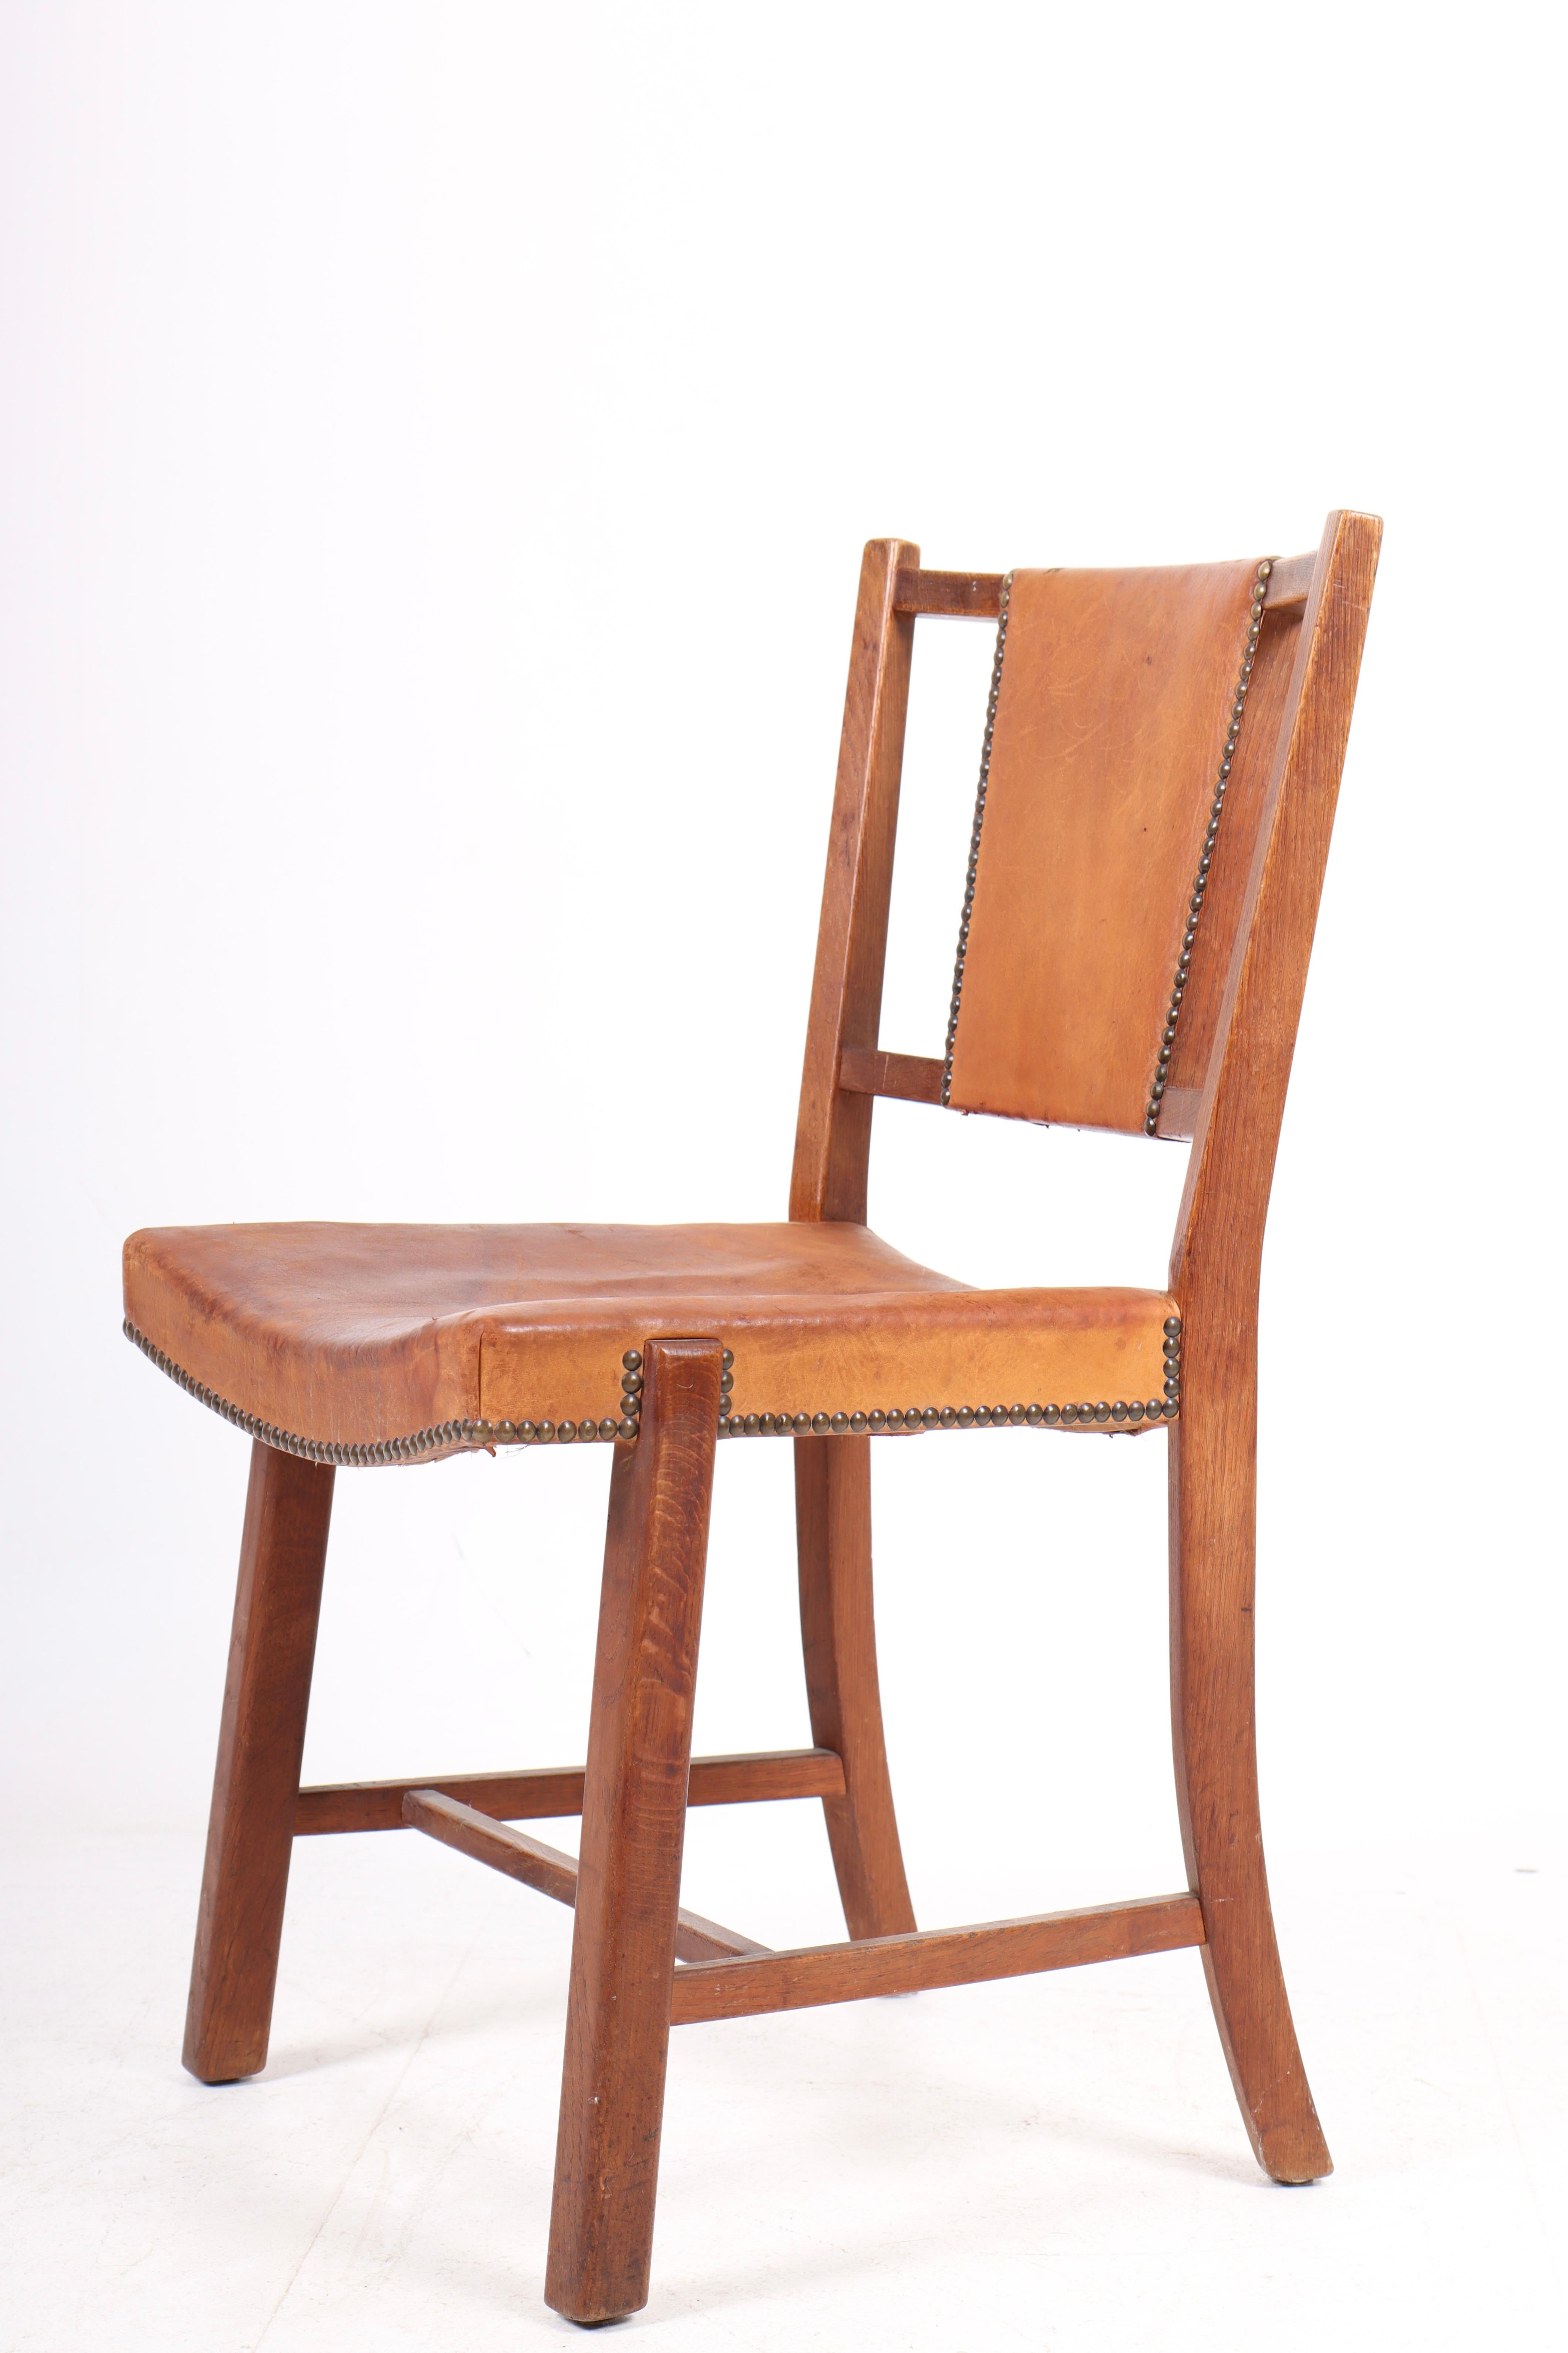 Mid-20th Century Danish Side Chair in Patinated Leather, 1940s For Sale